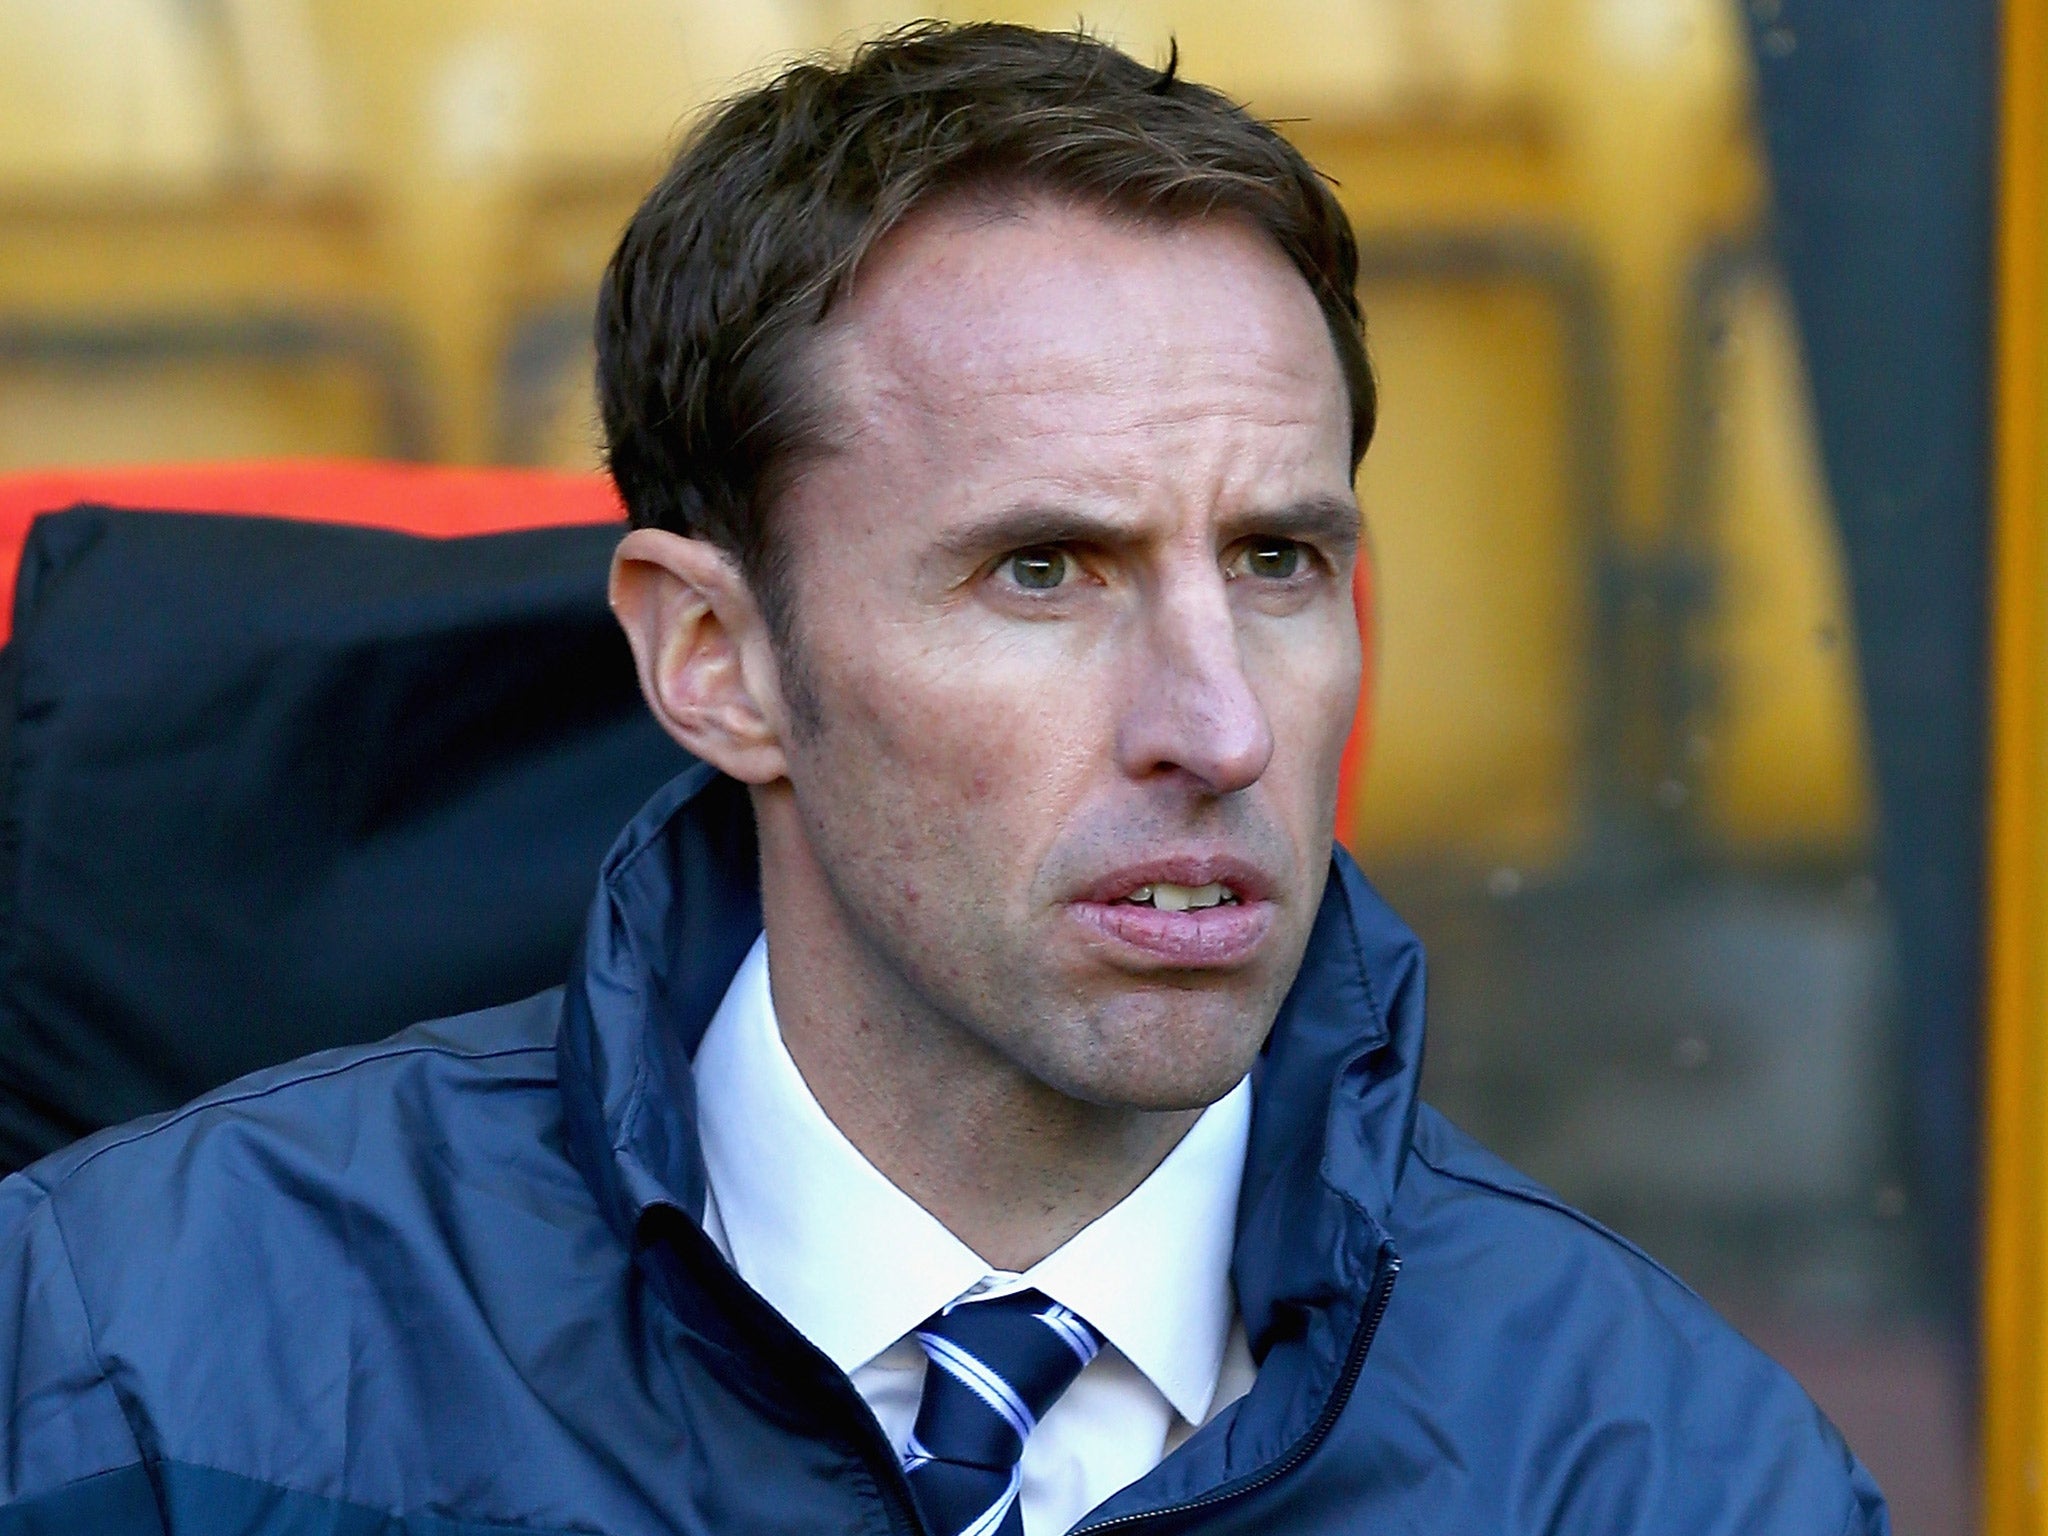 England Under-21s manager Gareth Southgate must now decide if he will take senior players to finals